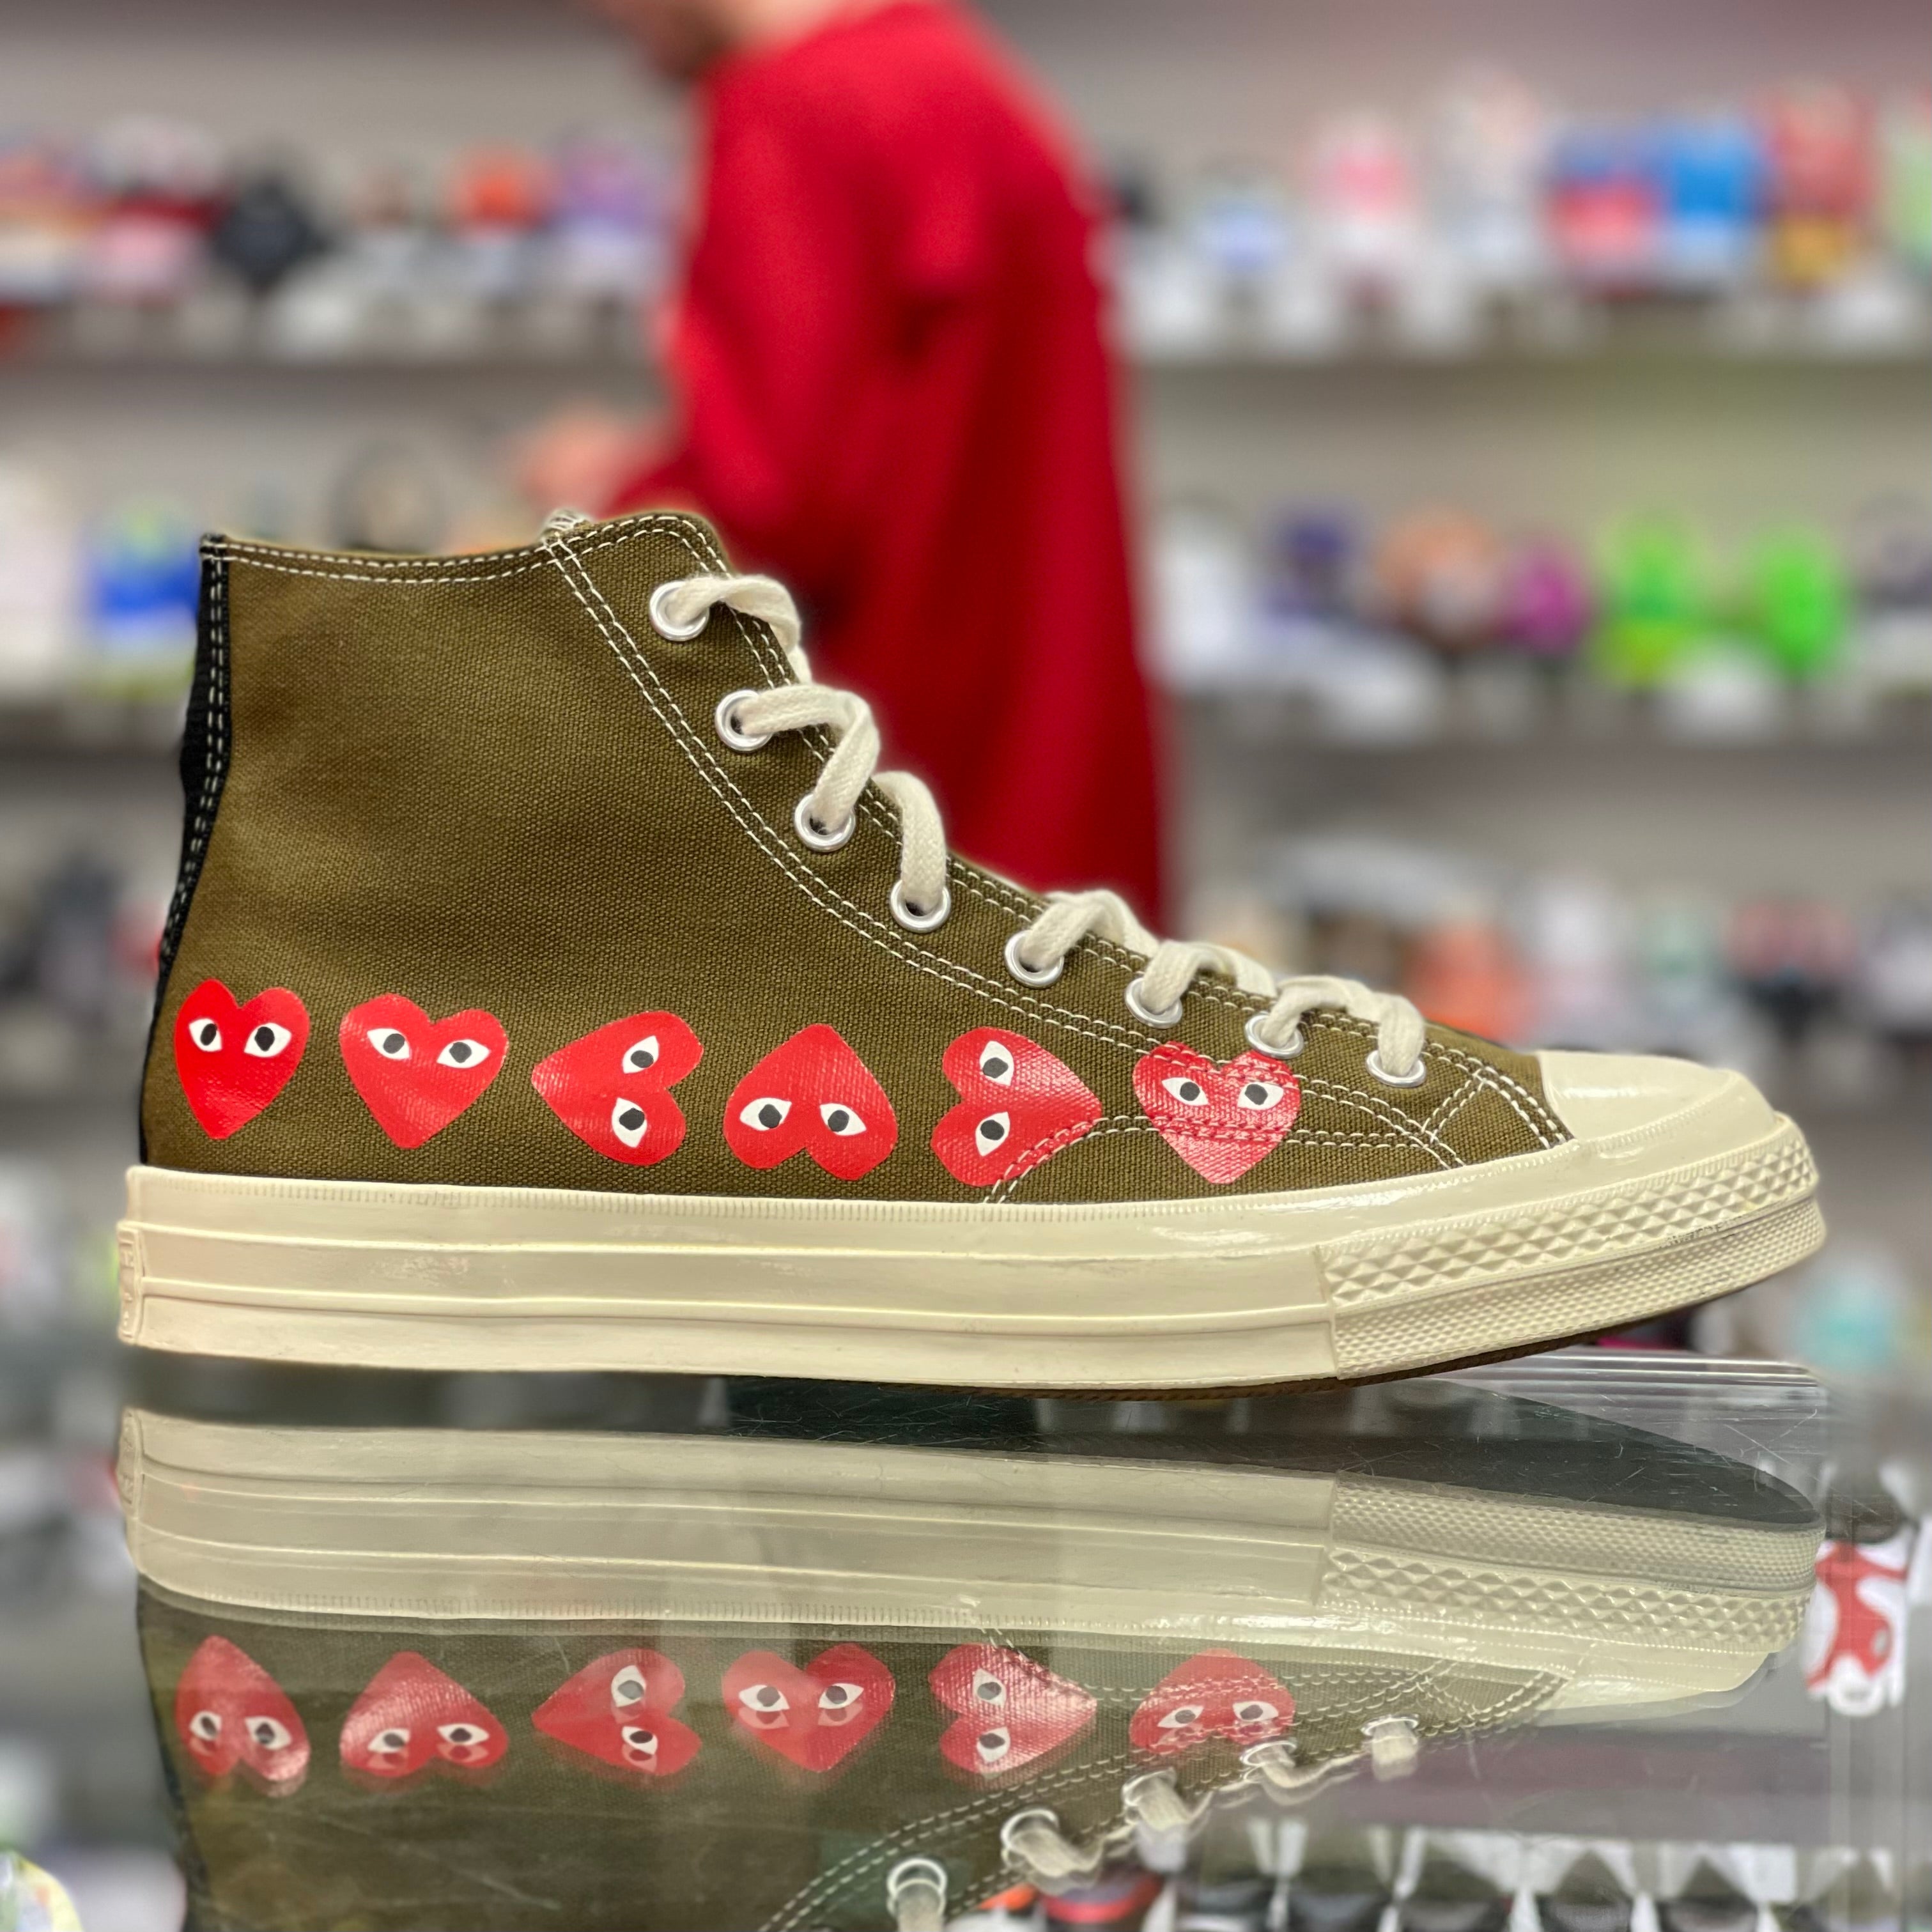 Converse Chuck Taylor CDG High “Olive”